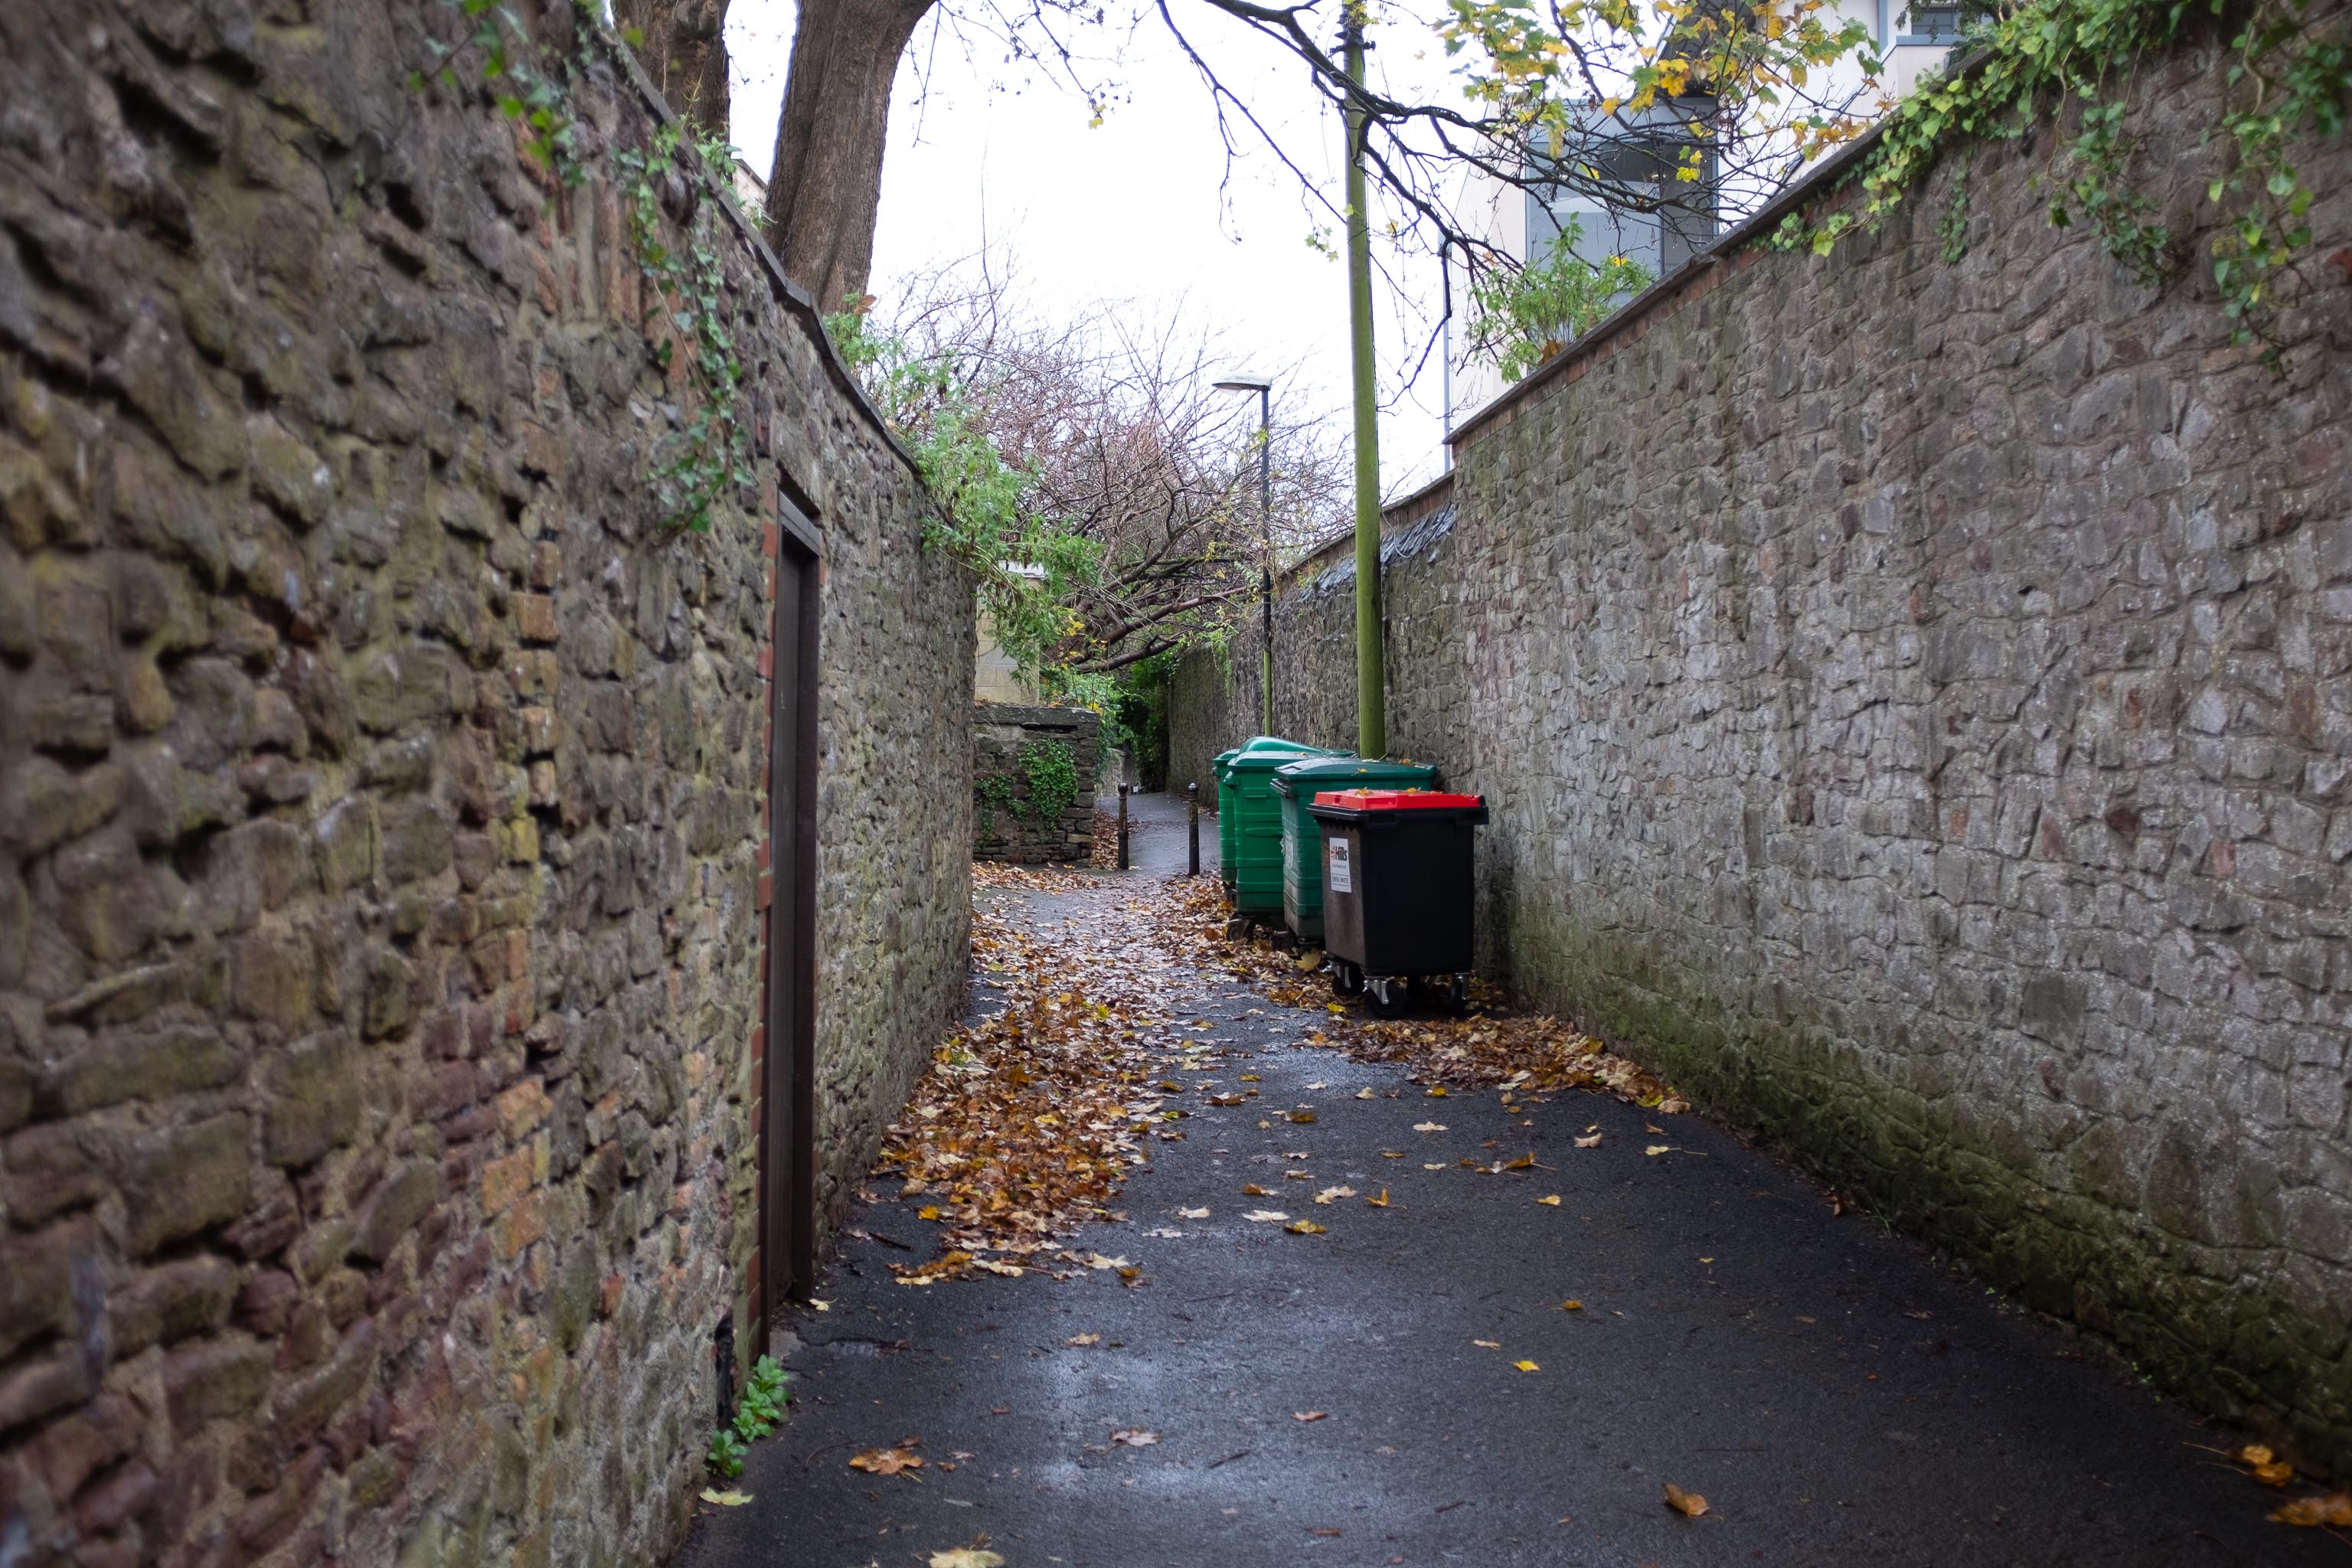 Many a time
Many a time have I wandered down this little cut-through that joins Saville Place and the Fosseway. A shortcut through the Polygon starts me off, t...